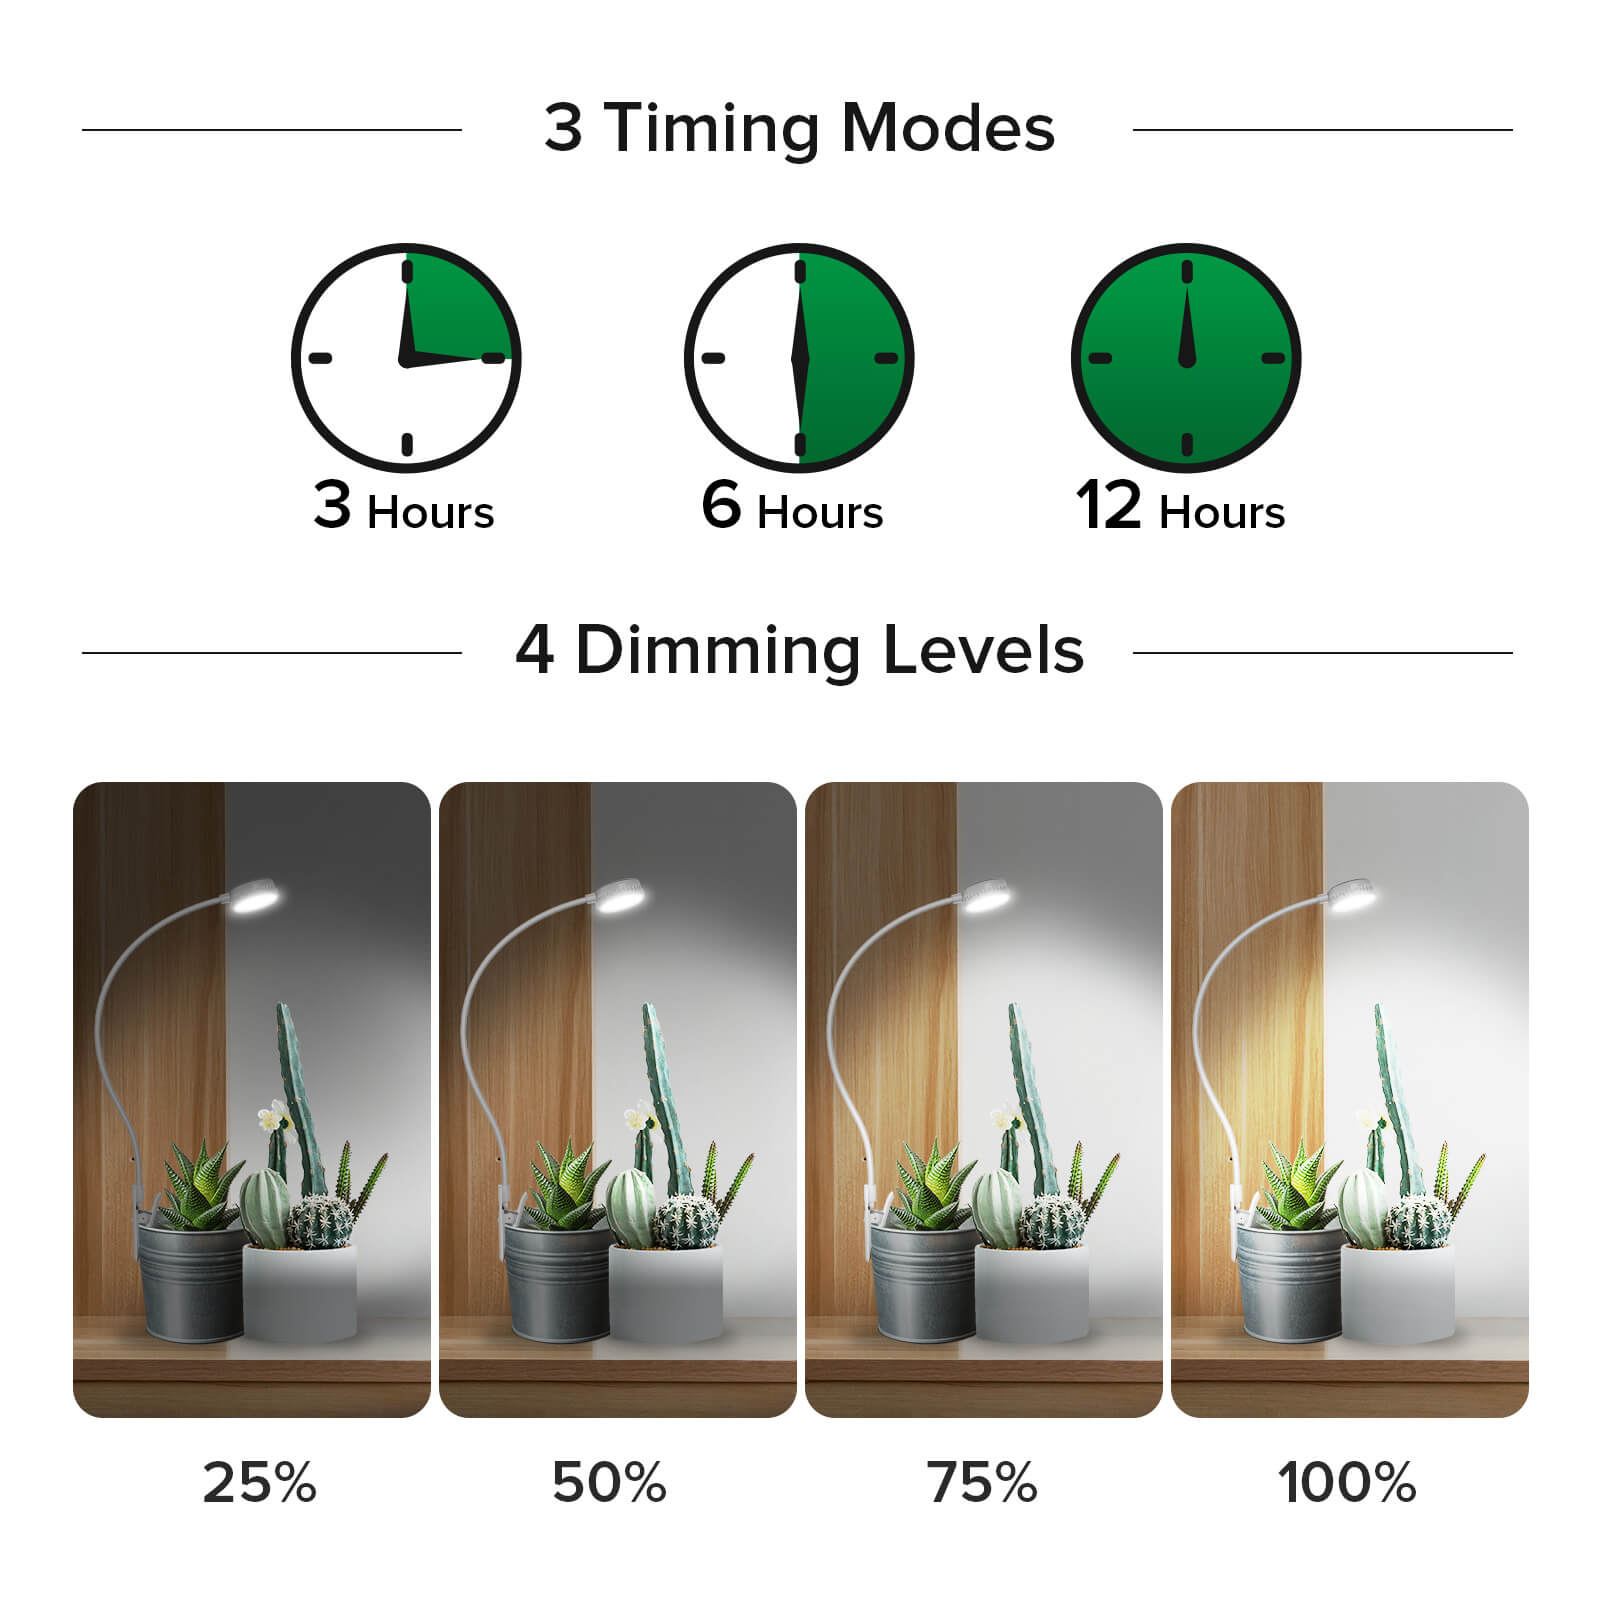 Pot Clip LED Grow Light has 3 timing modes, 12 hours, 6 hours and 12 hours